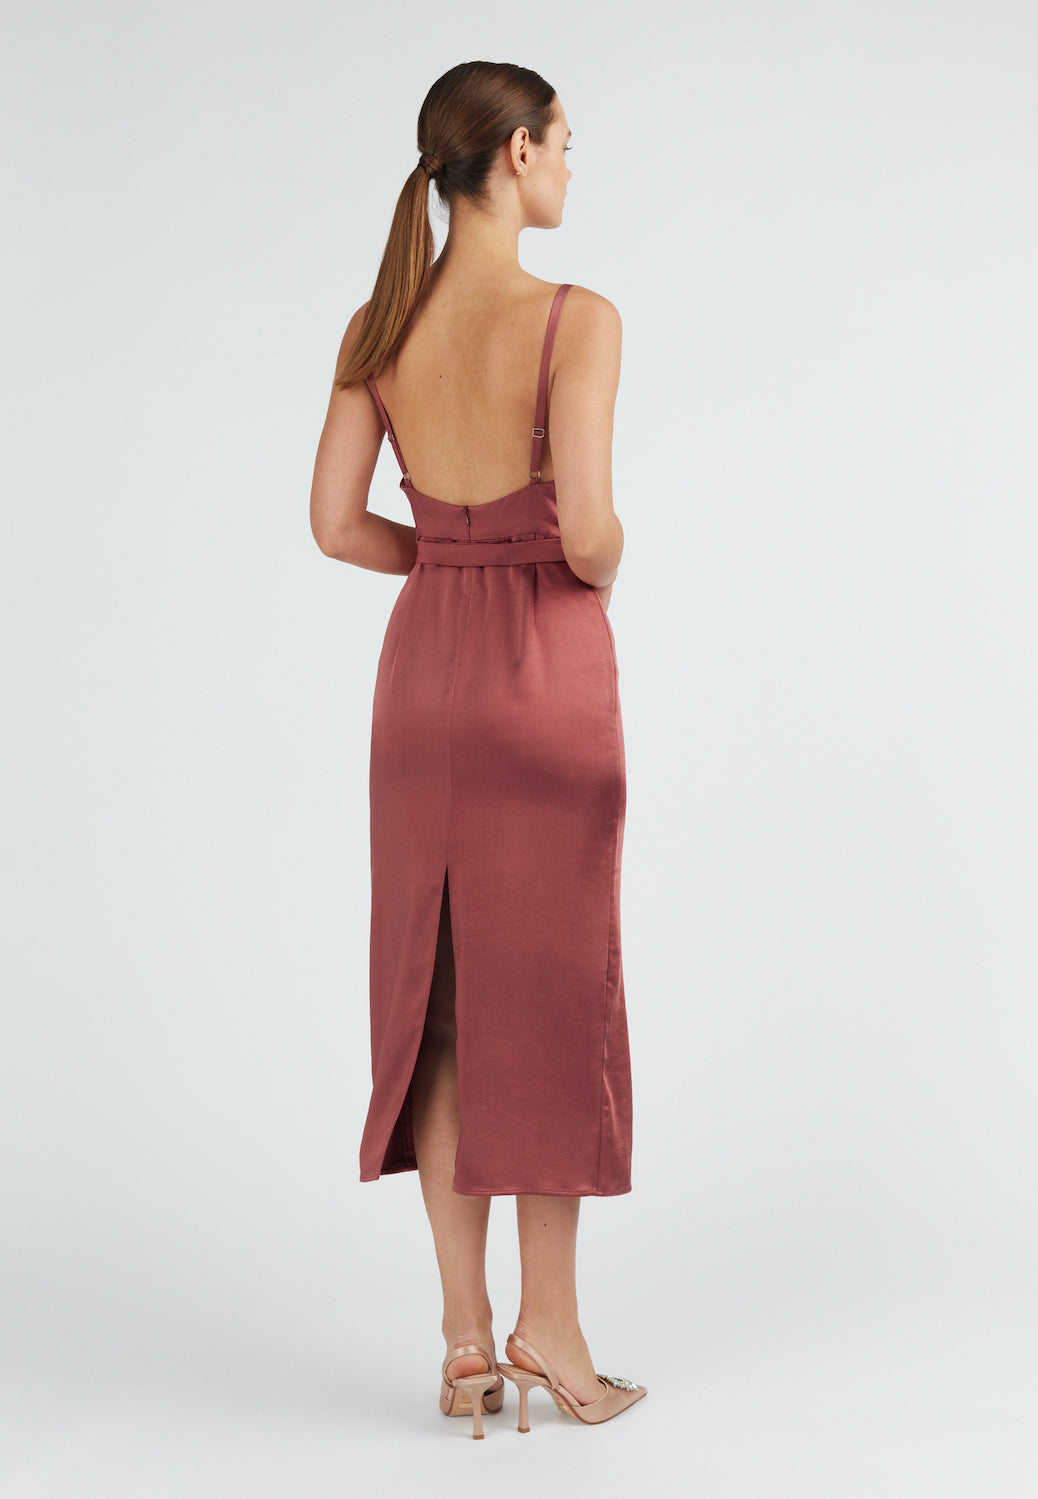 Brick red backless coctail dress with back slit